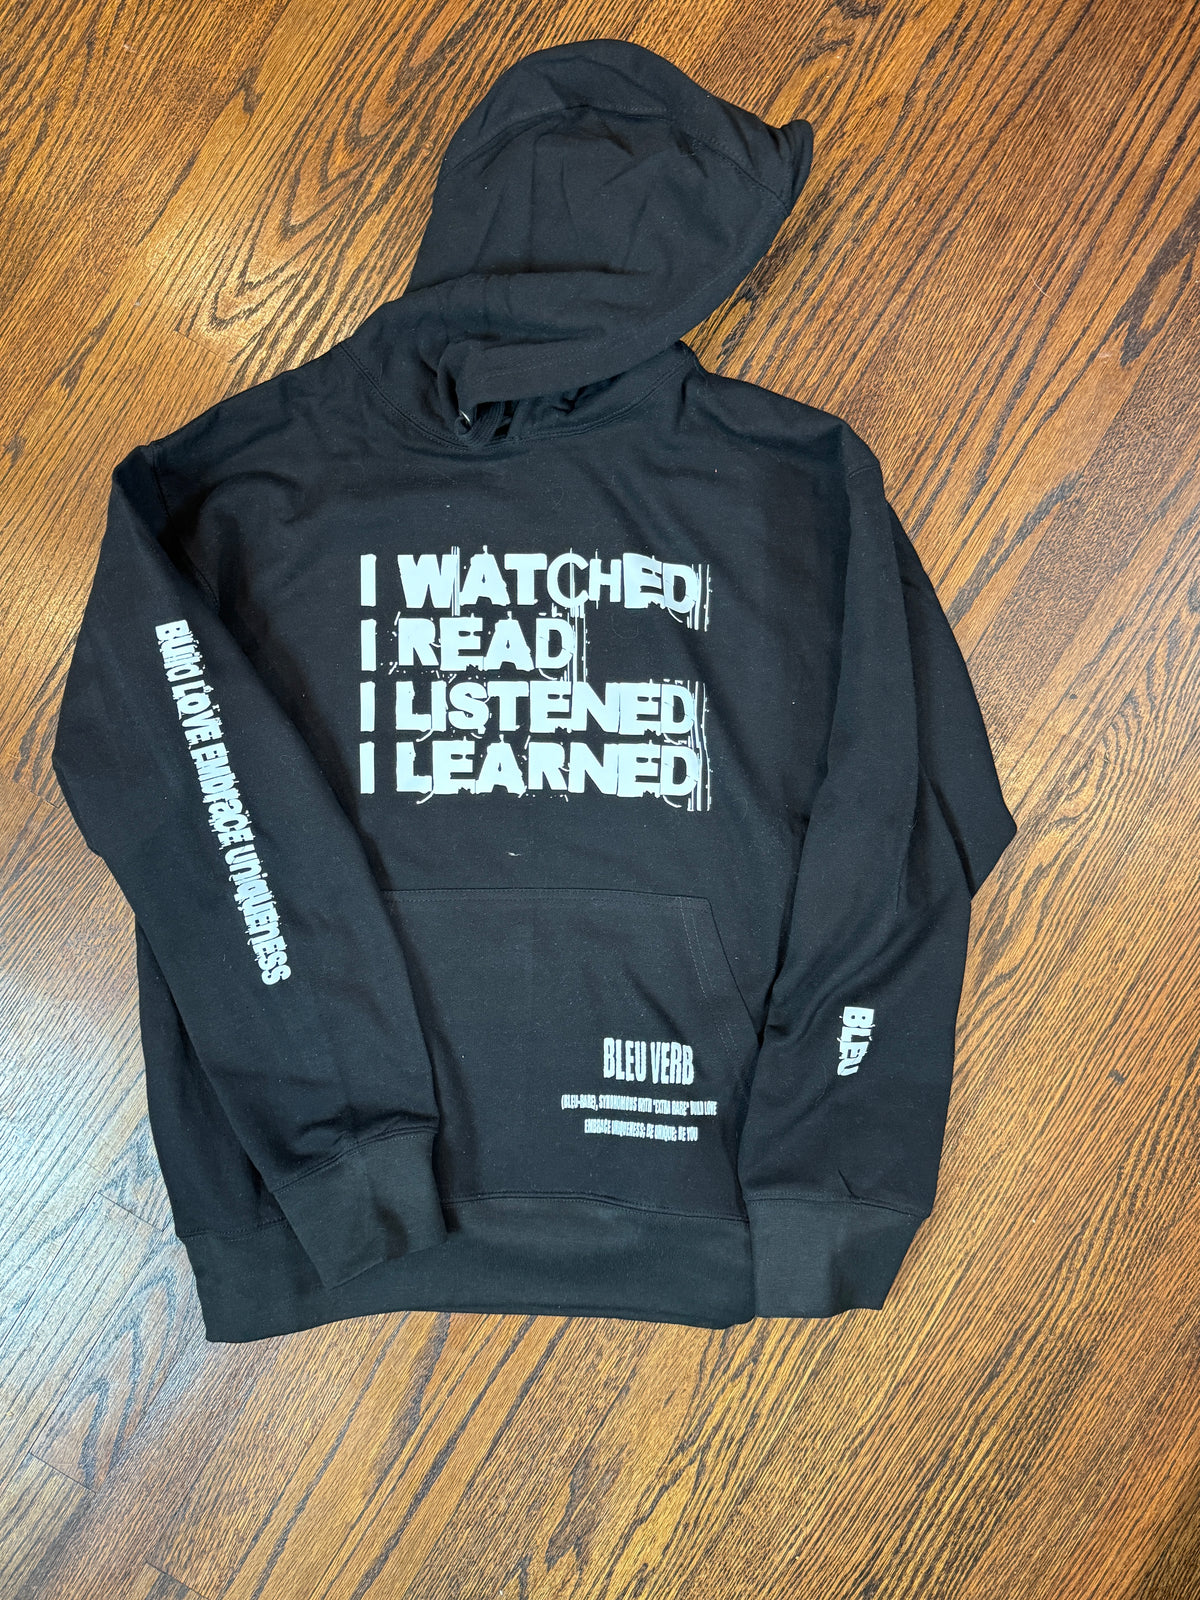 I Watched Read Listened Learned Hoodie